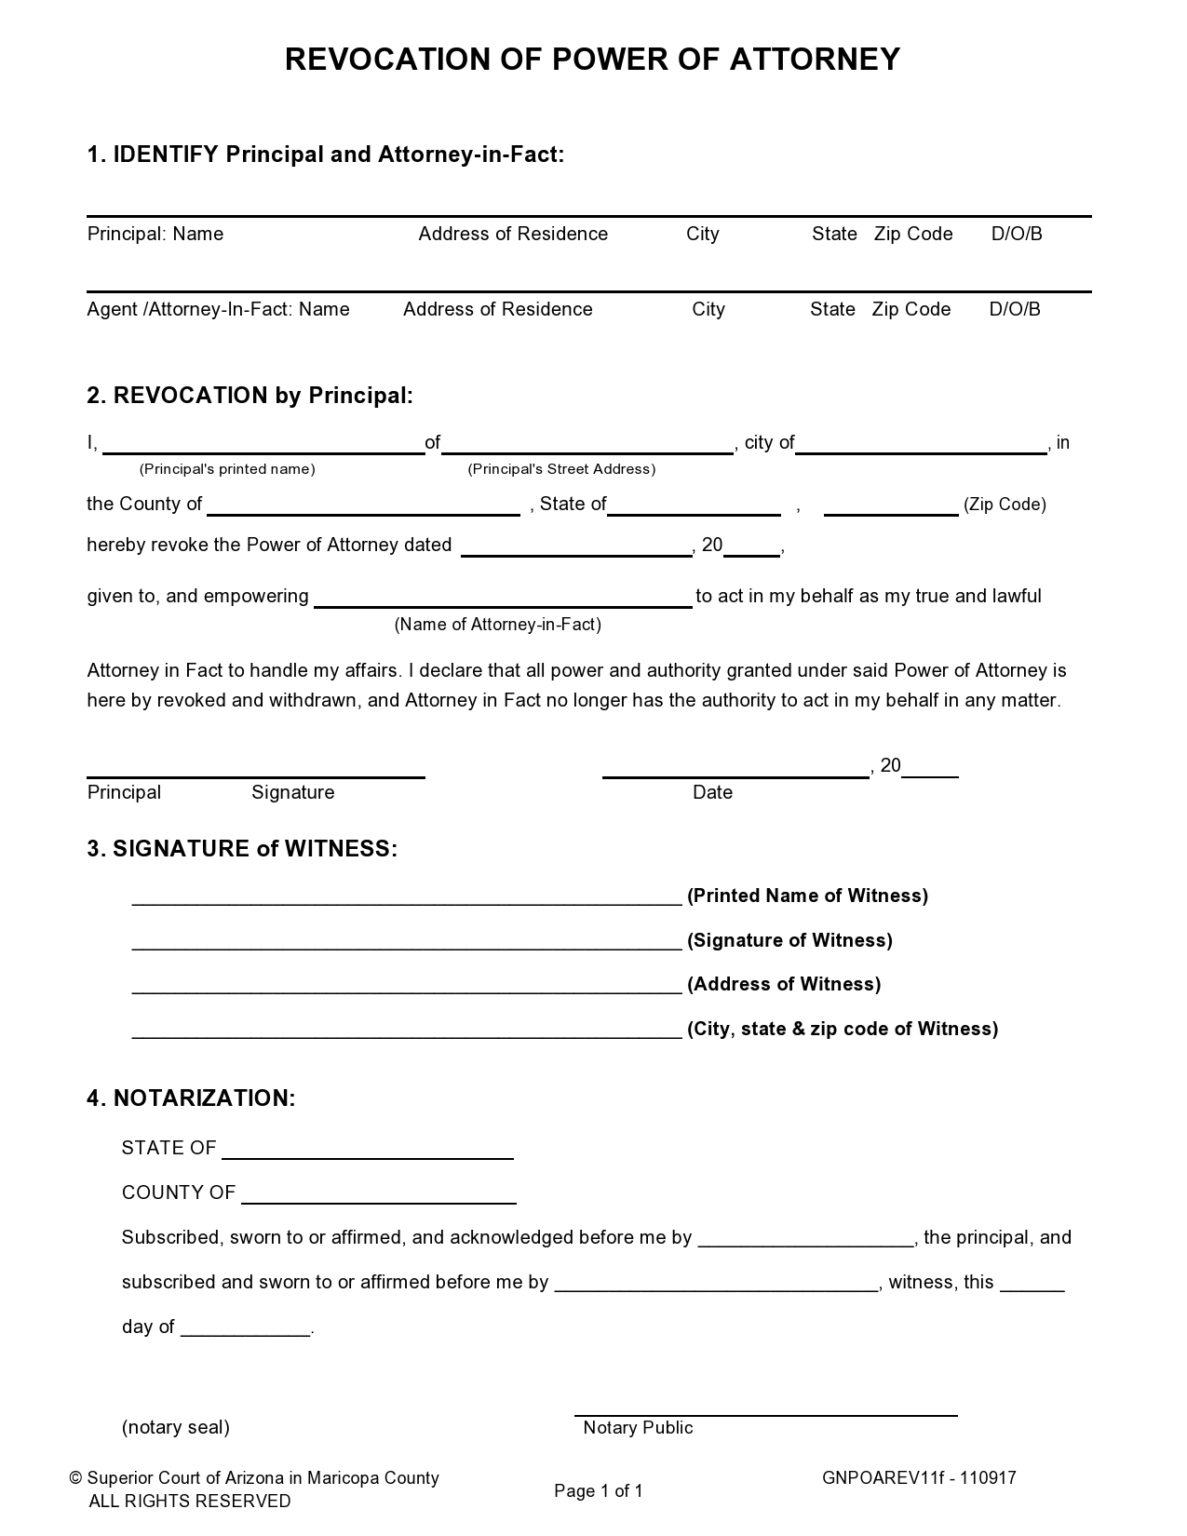 30 Free Power Of Attorney Revocation Forms Wordpdf Templatearchive 0616